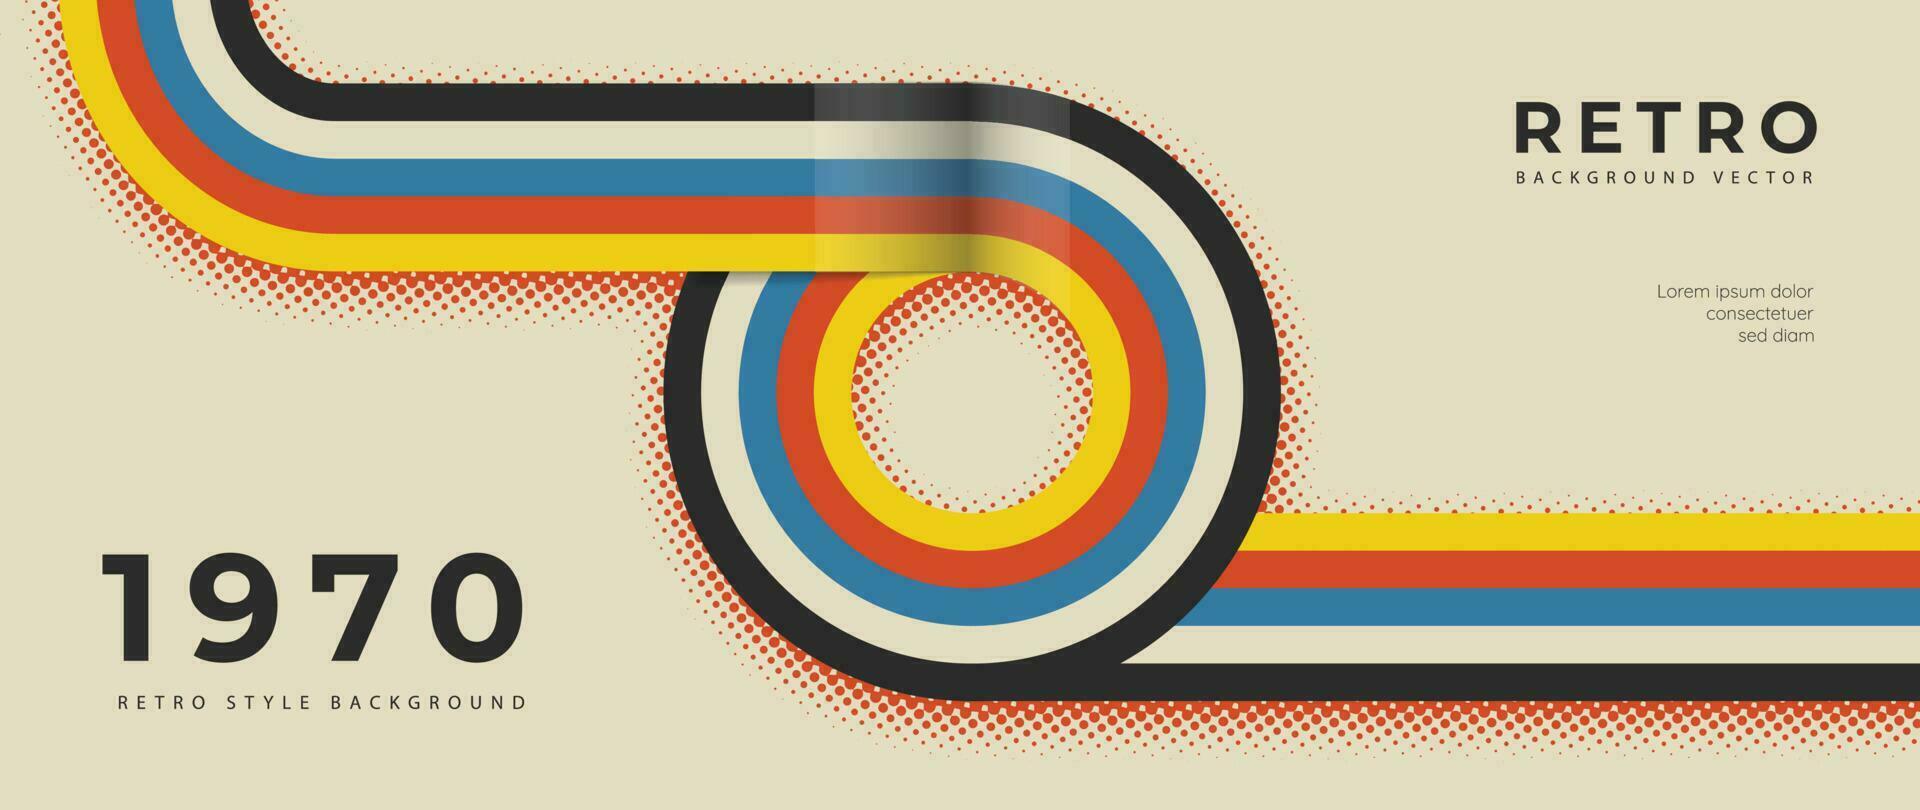 Abstract retro 70s background vector. Colorful vintage 1970 stylish wallpaper with lines, stripes, curve, circle shapes. Illustration design suitable for poster, banner, decorative, wall art. vector